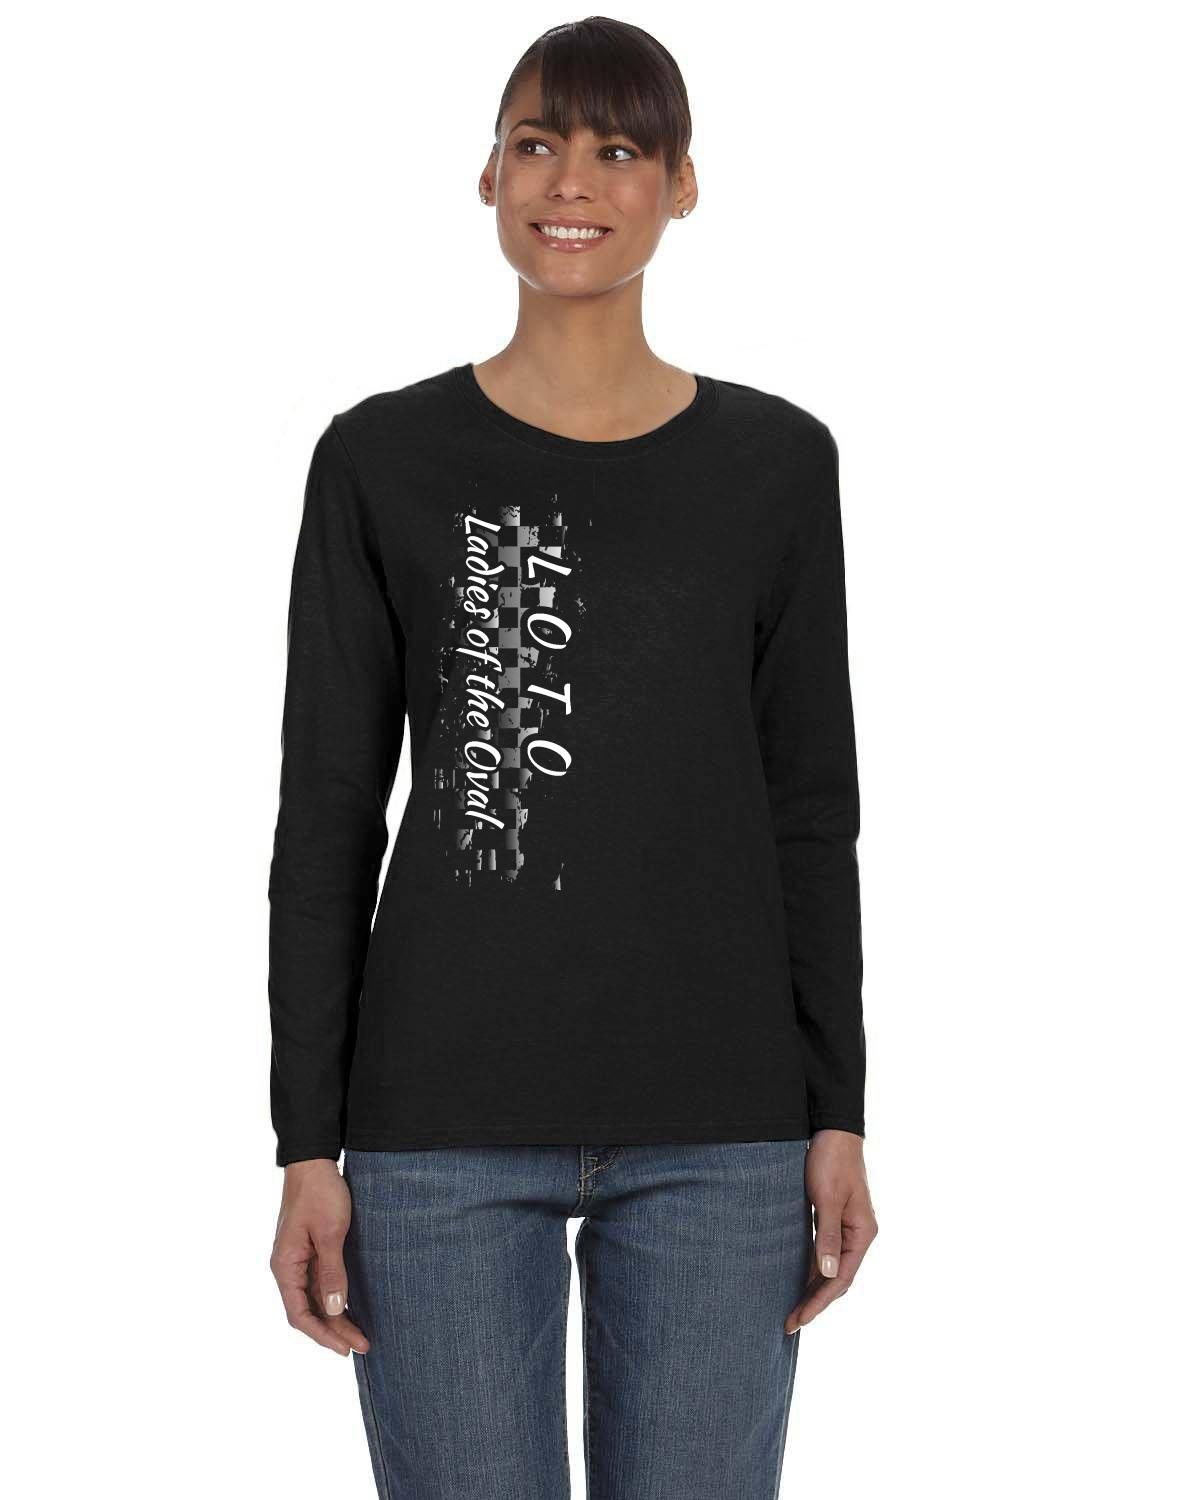 LOTO Ladies of the Oval Ladies' Long-Sleeve T-Shirt